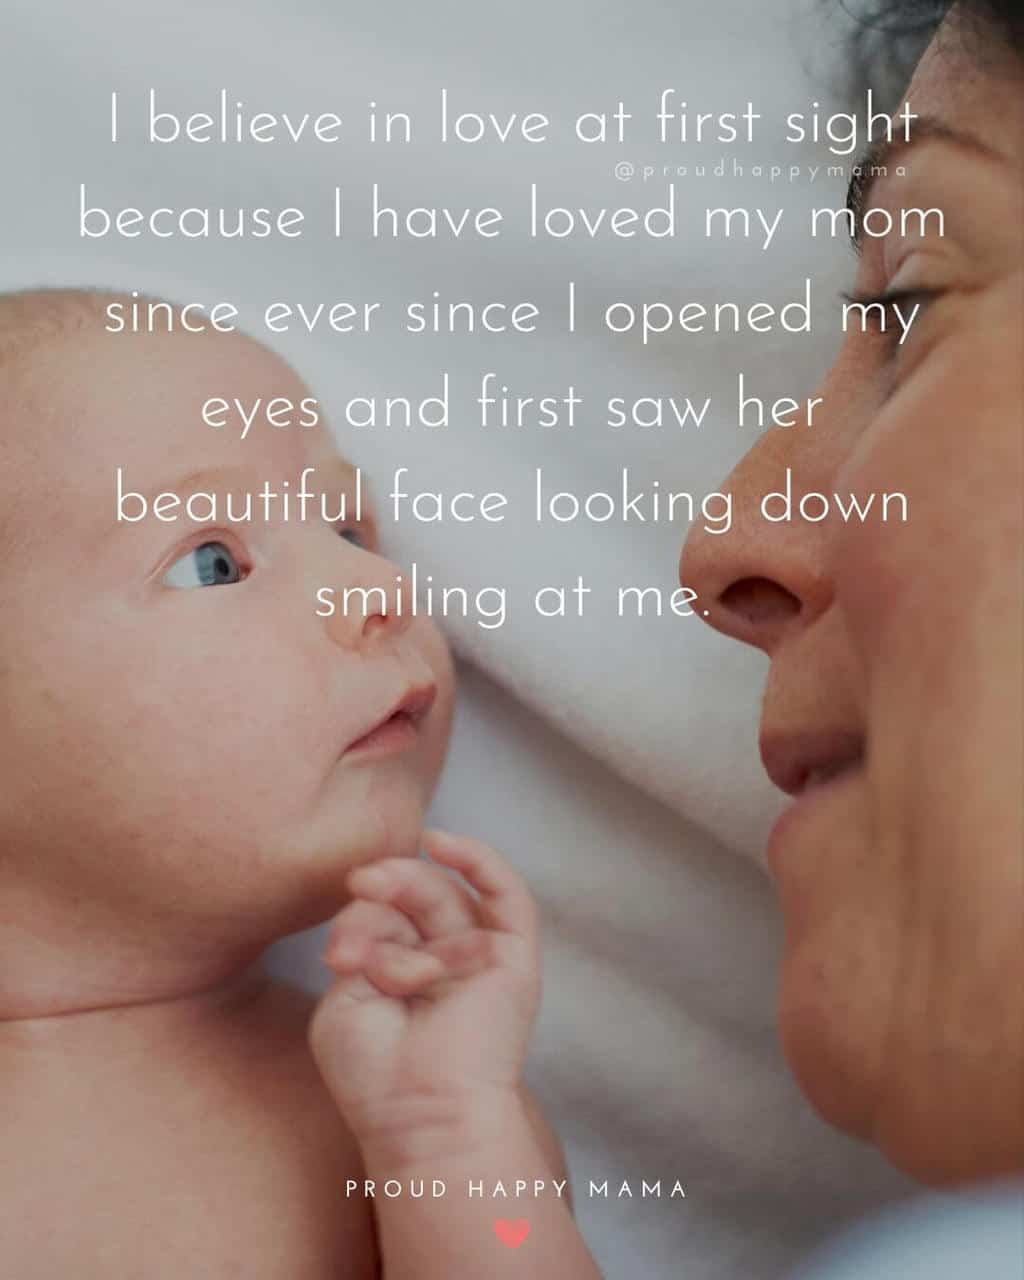 Mother And Son Bonding Quotes | I believe in love at first sight because I have loved my mom since ever since I opened my eyes and first saw her beautiful face looking down smiling at me.